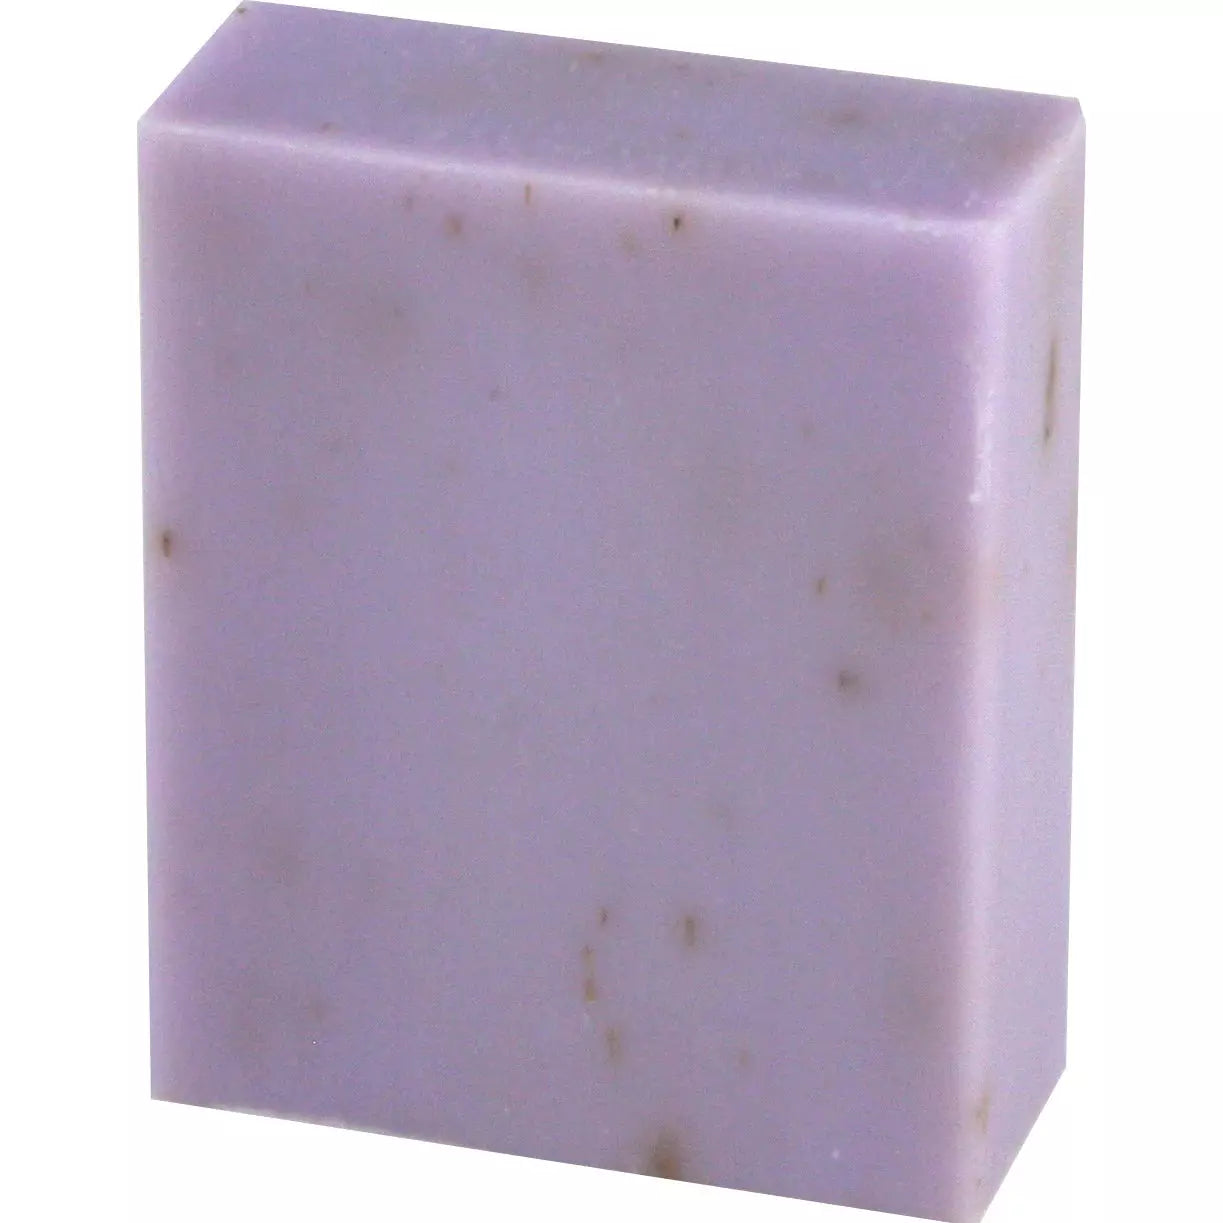 Wavertree and London - Unwrapped Soap Bar Lavender 100g